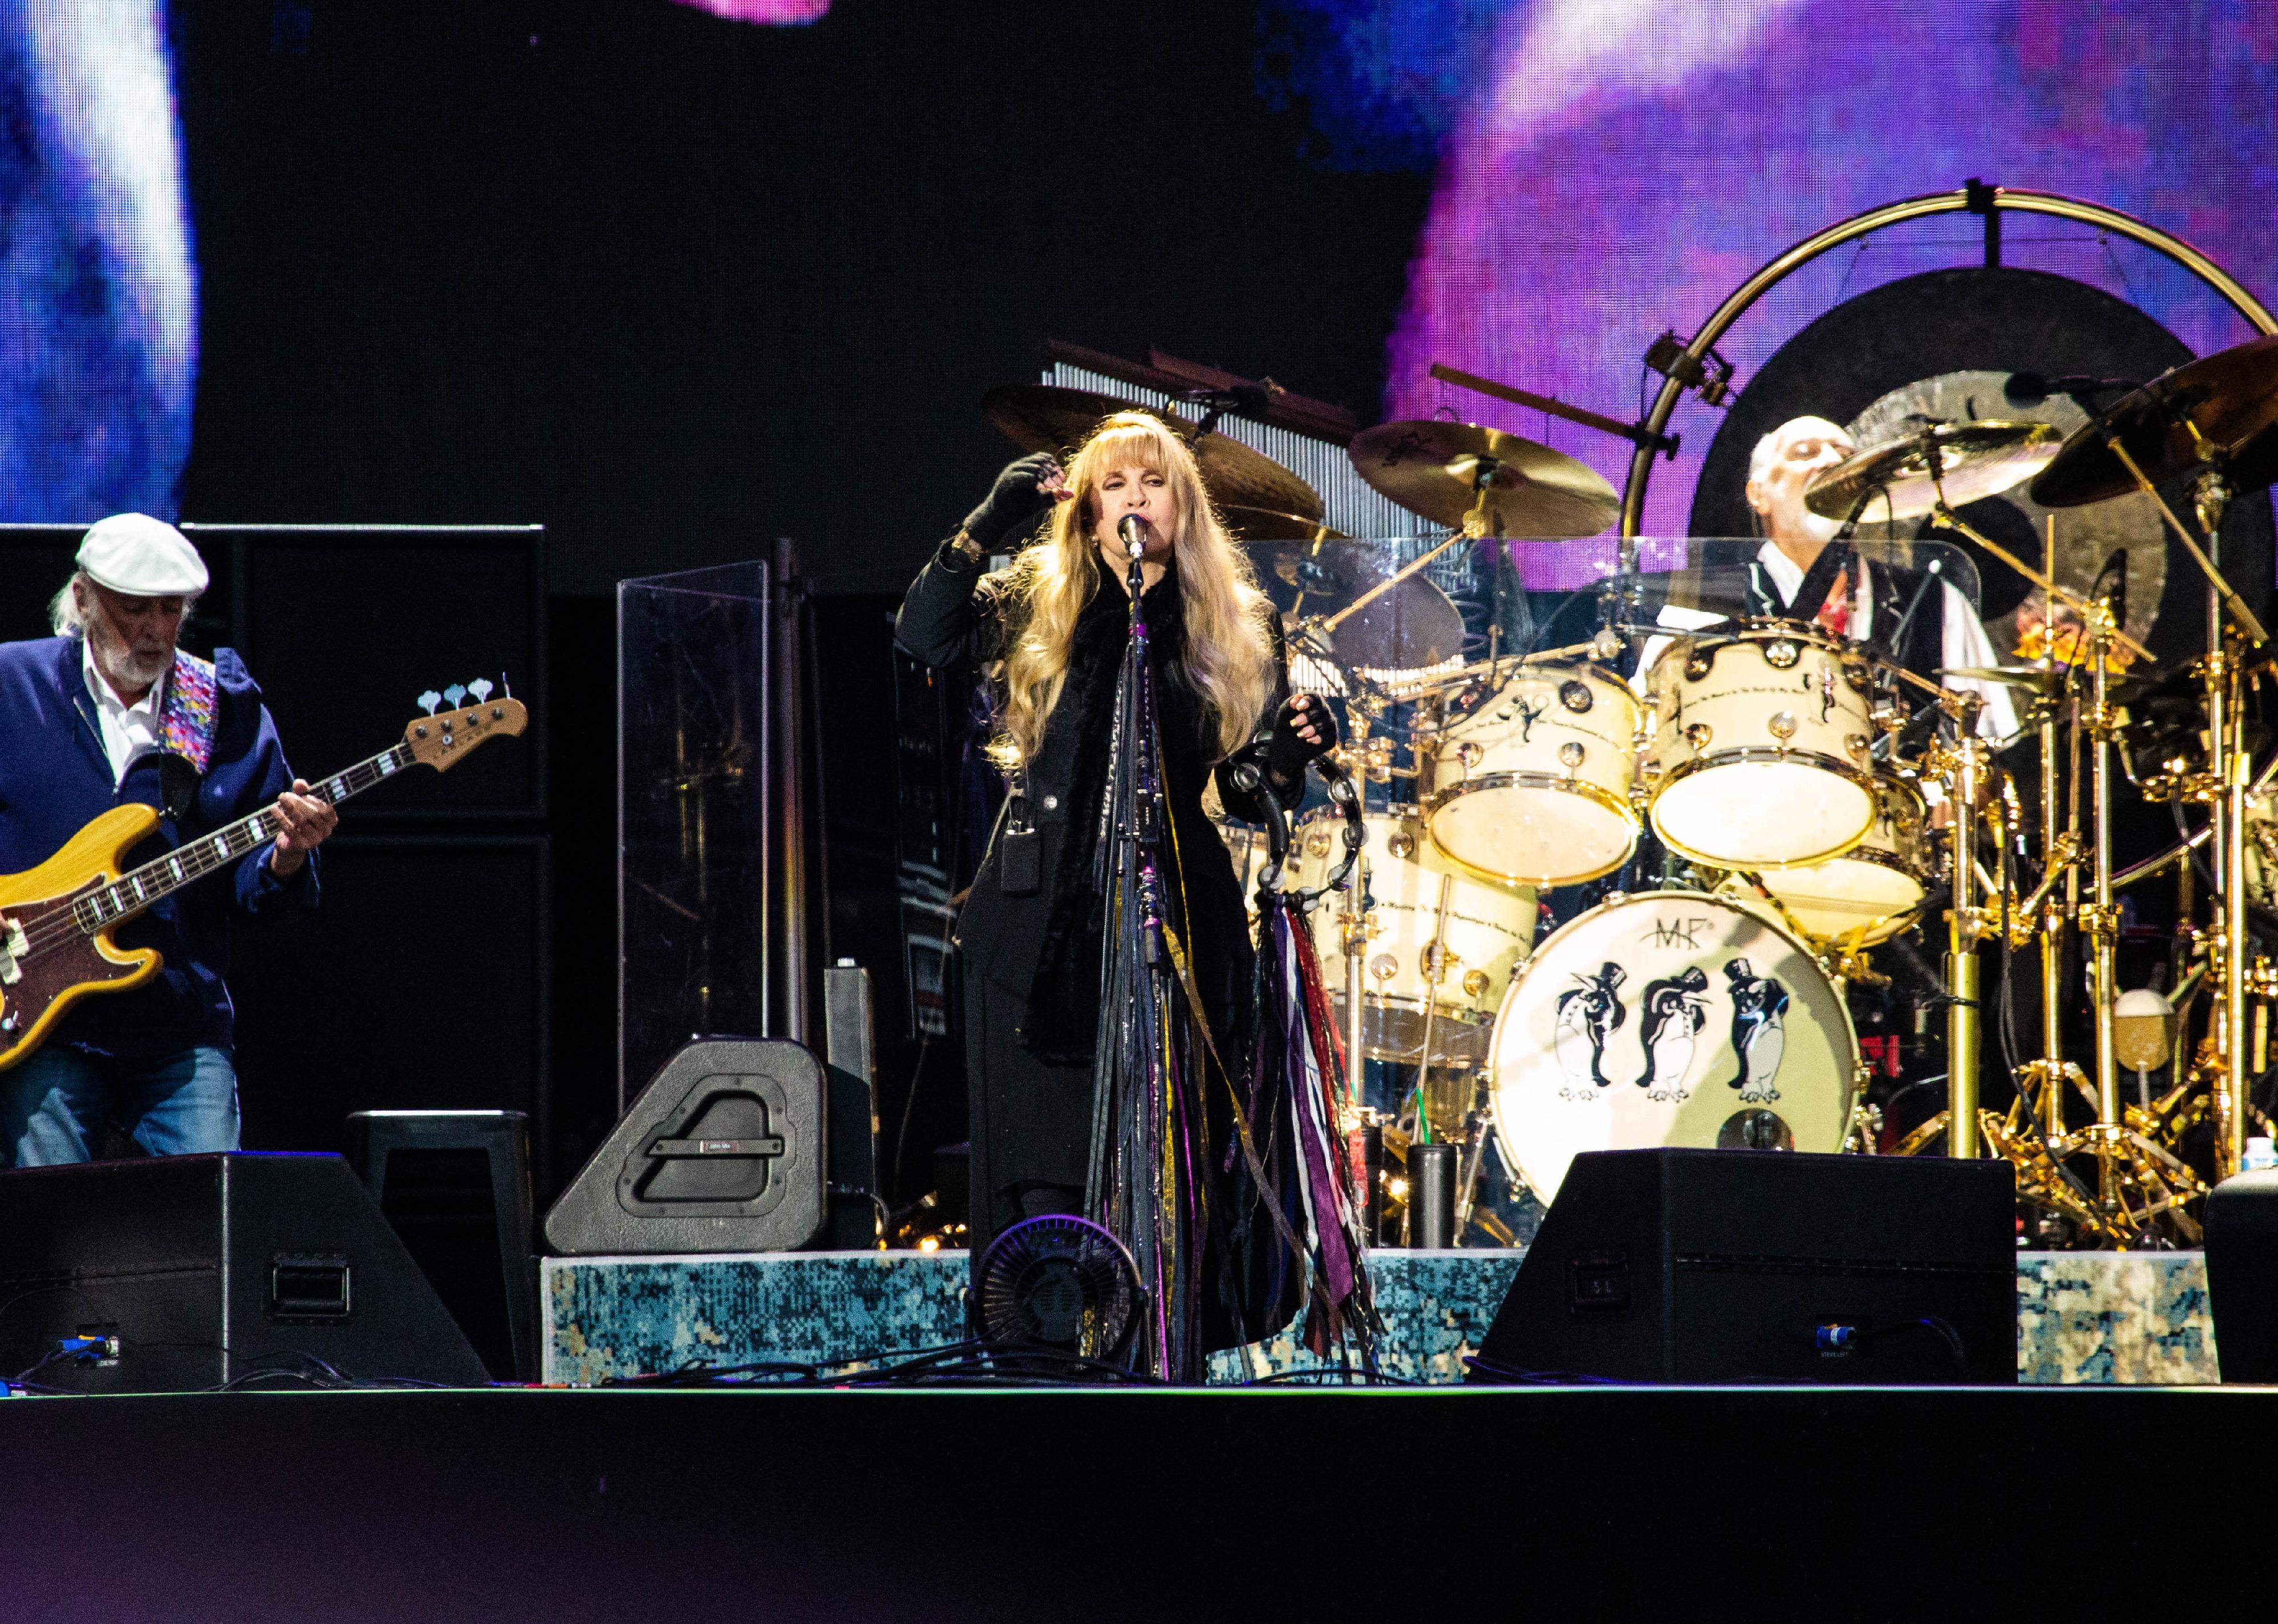 <p>This hotly anticipated world tour was preceded by controversy when <a href="https://pitchfork.com/news/stevie-nicks-makes-first-public-statement-on-lindsey-buckinghams-firing-from-fleetwood-mac/">guitarist Lindsey Buckingham was fired</a> due to reported scheduling conflicts. Neil Finn of Crowded House and Mike Campbell of Tom Petty's Heartbreakers joined the band in Buckingham's place. The group sold out shows around the world before delivering a final <a href="https://www.fleetwoodmacnews.com/2019/">performance at the 10th annual Concert for UCSF Benioff Children's Hospitals</a> in San Francisco's Oracle Park.</p> <p><strong>You may also like:</strong> <a href="https://stacker.com/music/25-musicians-you-assumed-were-american-arent">25 musicians you assumed were American but aren't</a></p>